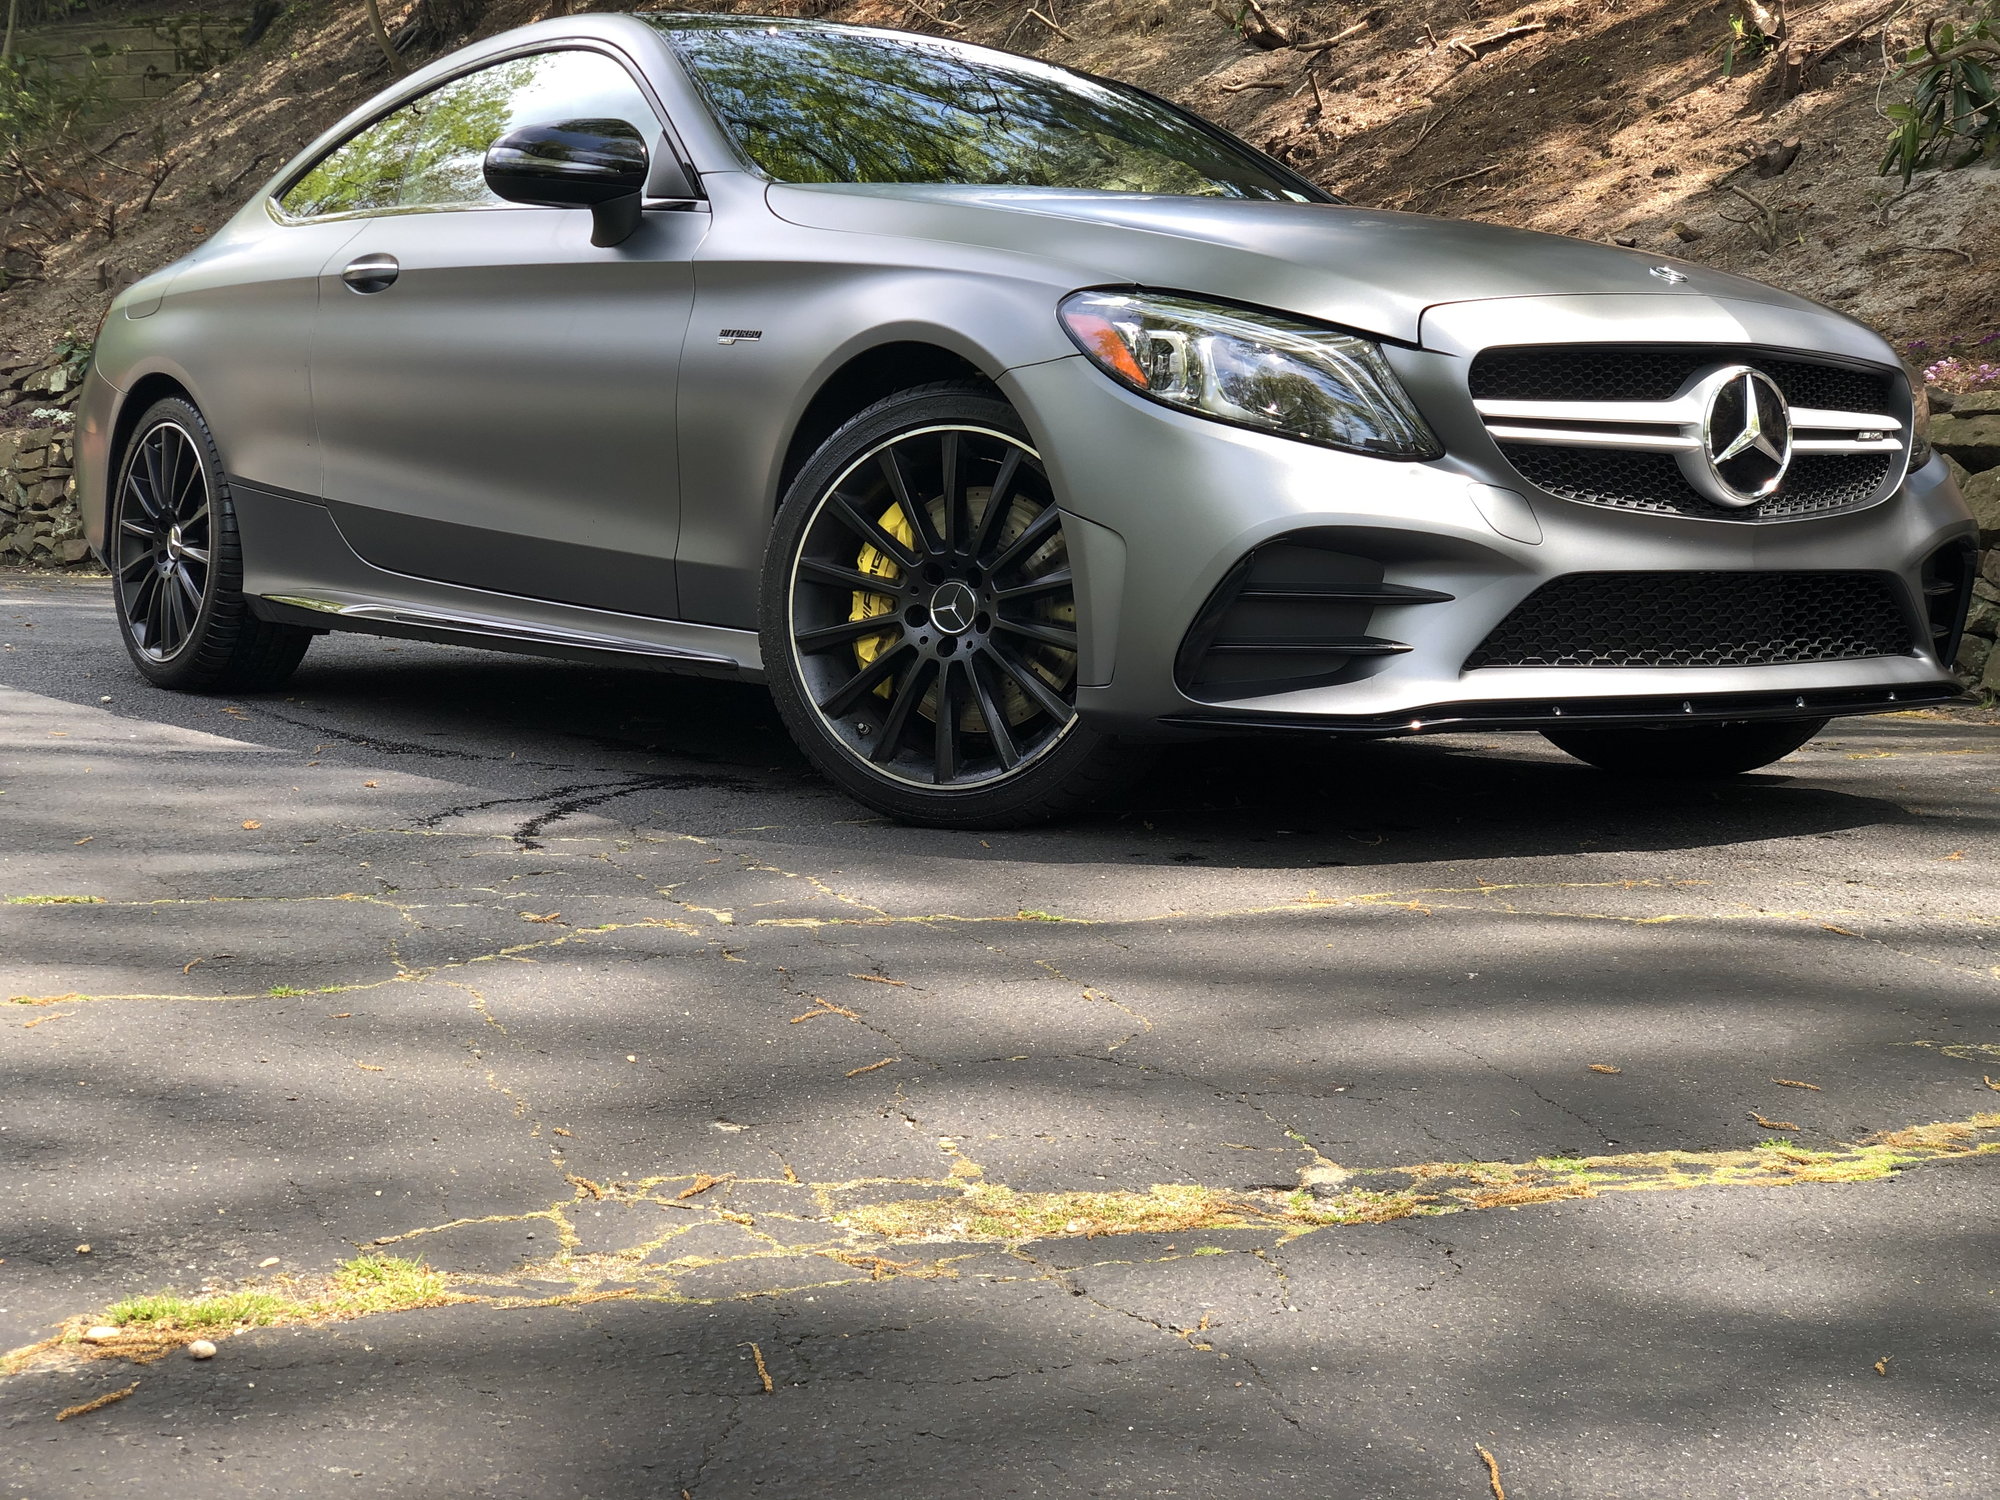 2019 Mercedes-Benz C43 AMG - Factory matte gray c43 - Used - VIN Wddwj6eb7kf869379 - 7,200 Miles - 6 cyl - AWD - Automatic - Coupe - Gray - Ocean, NJ 07712, United States